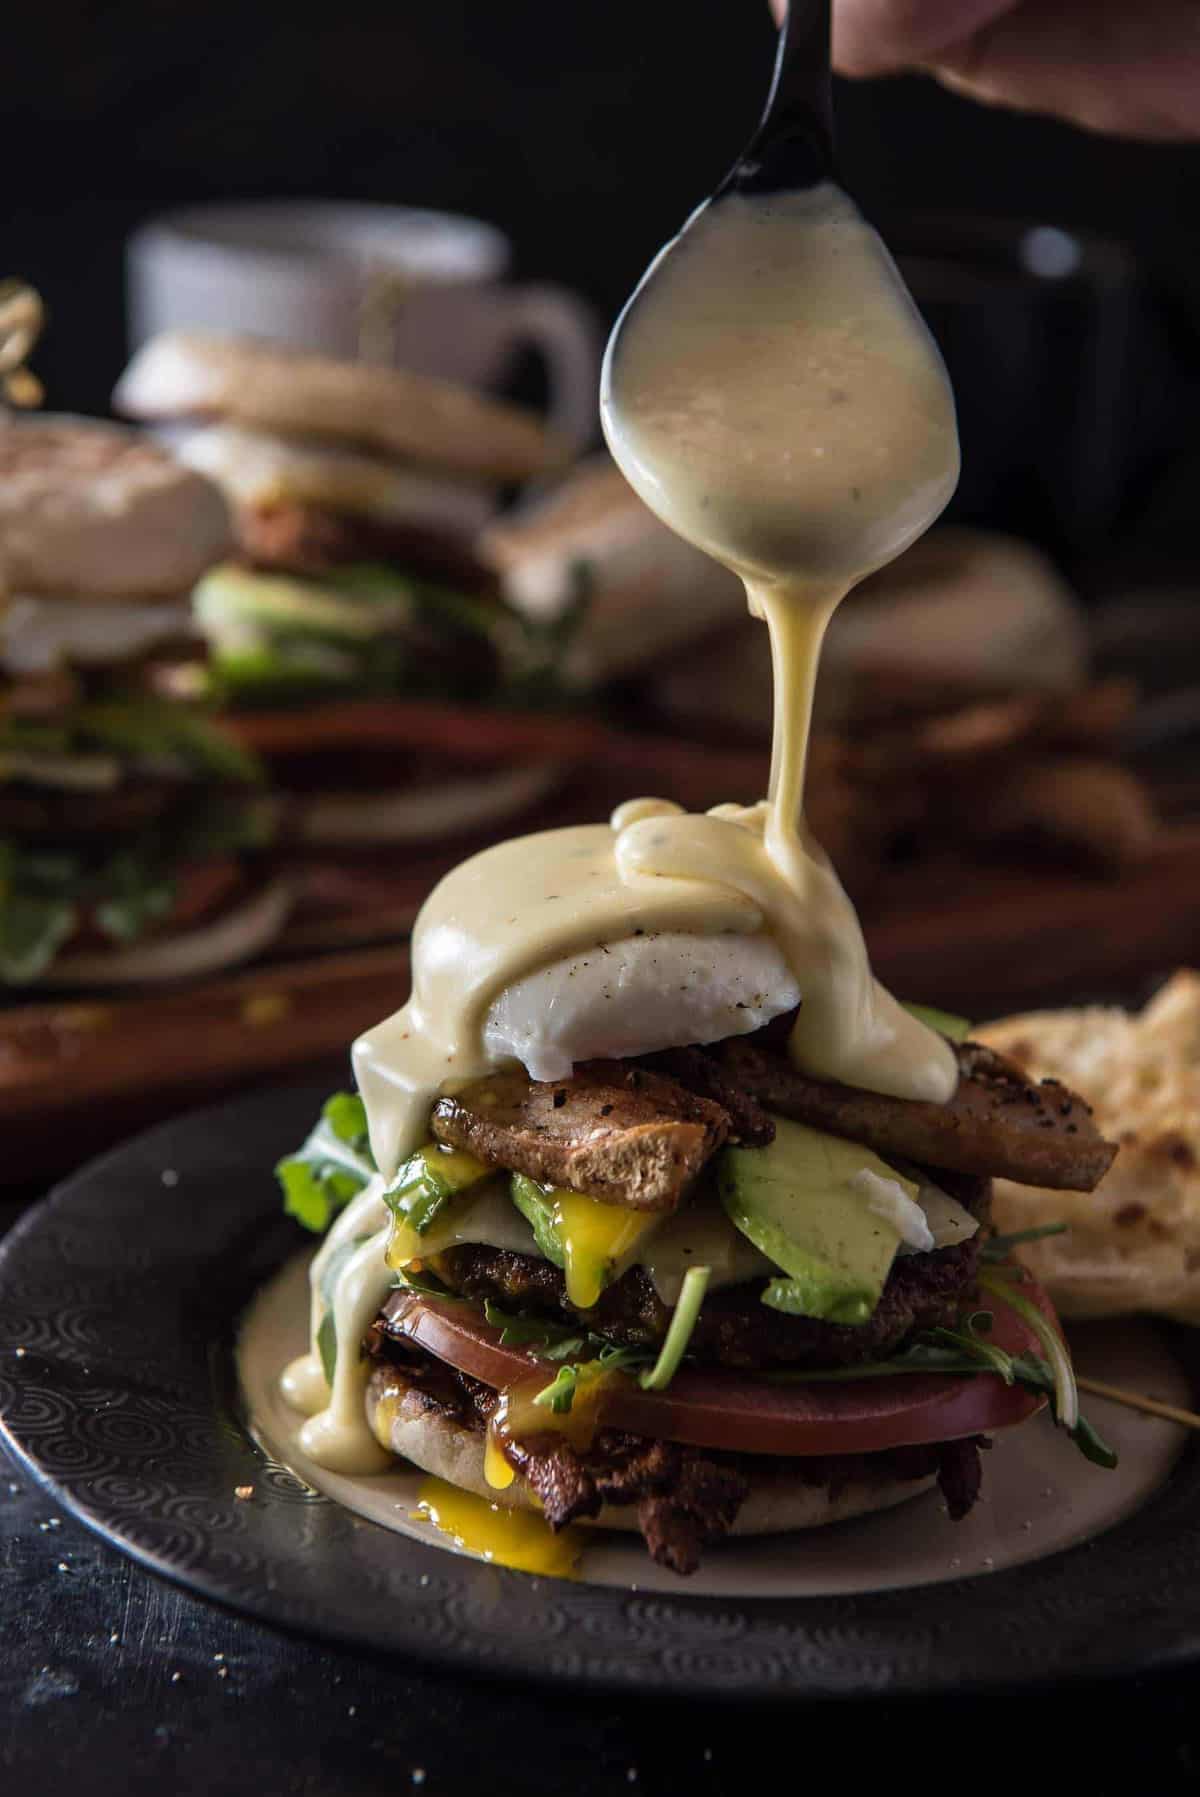 You think you do brunch? The Ultimate Brunch Burger is a foodie's dream - a beef & sausage patty, crispy pork belly, cheddar cheese, hash browns, avocado, a poached egg, tomato, and arugula, all topped with homemade spicy Hollandaise.